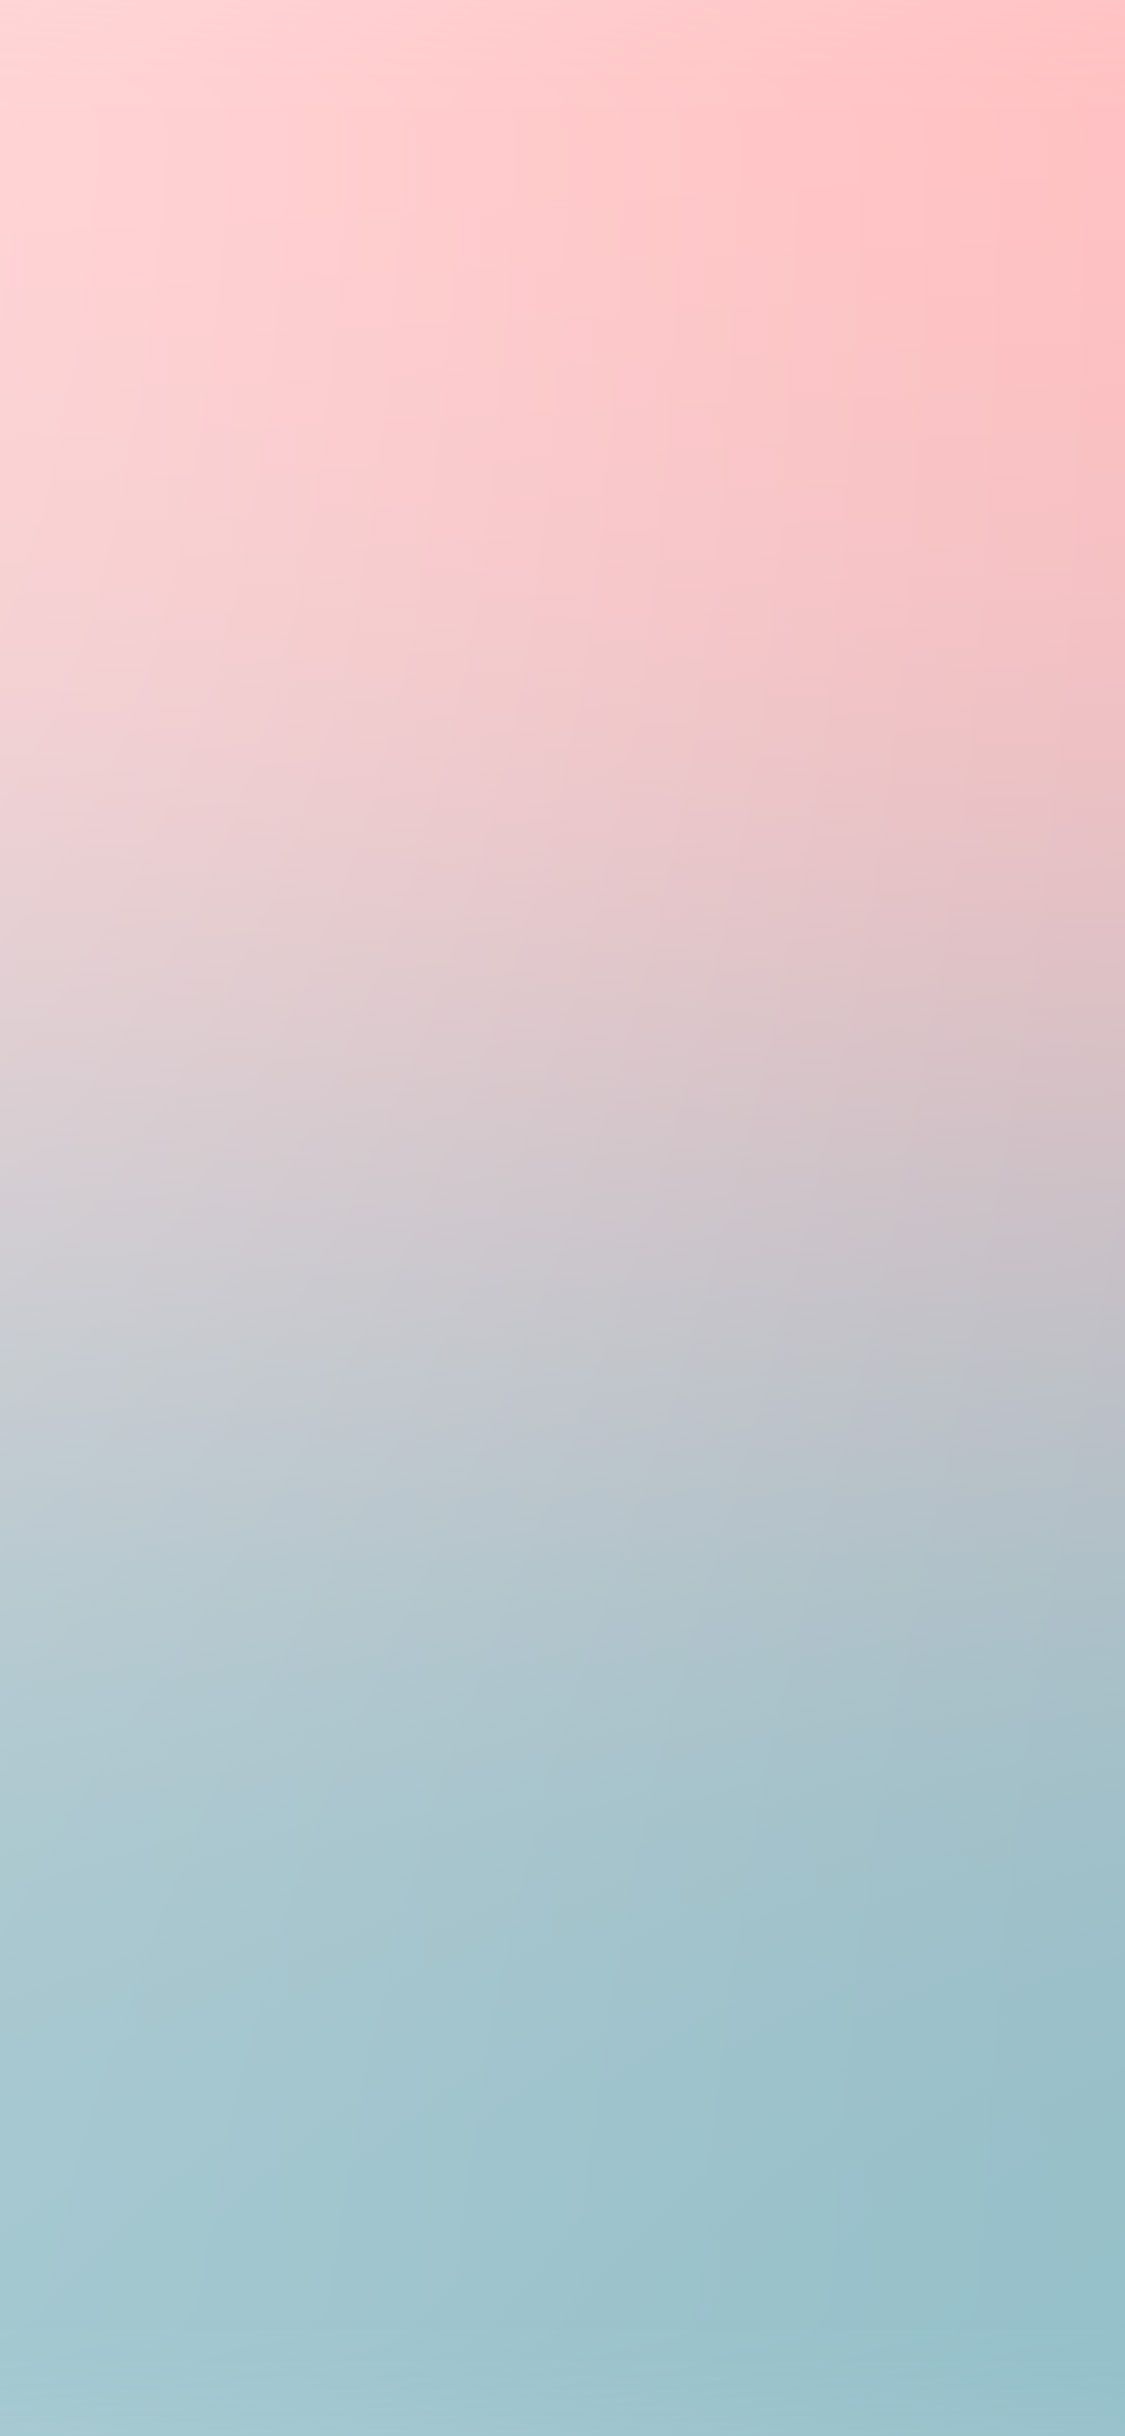 Pastel colors backgrounds, Minimalistic and chic, Versatile and timeless, Soft and gentle, 1130x2440 HD Handy